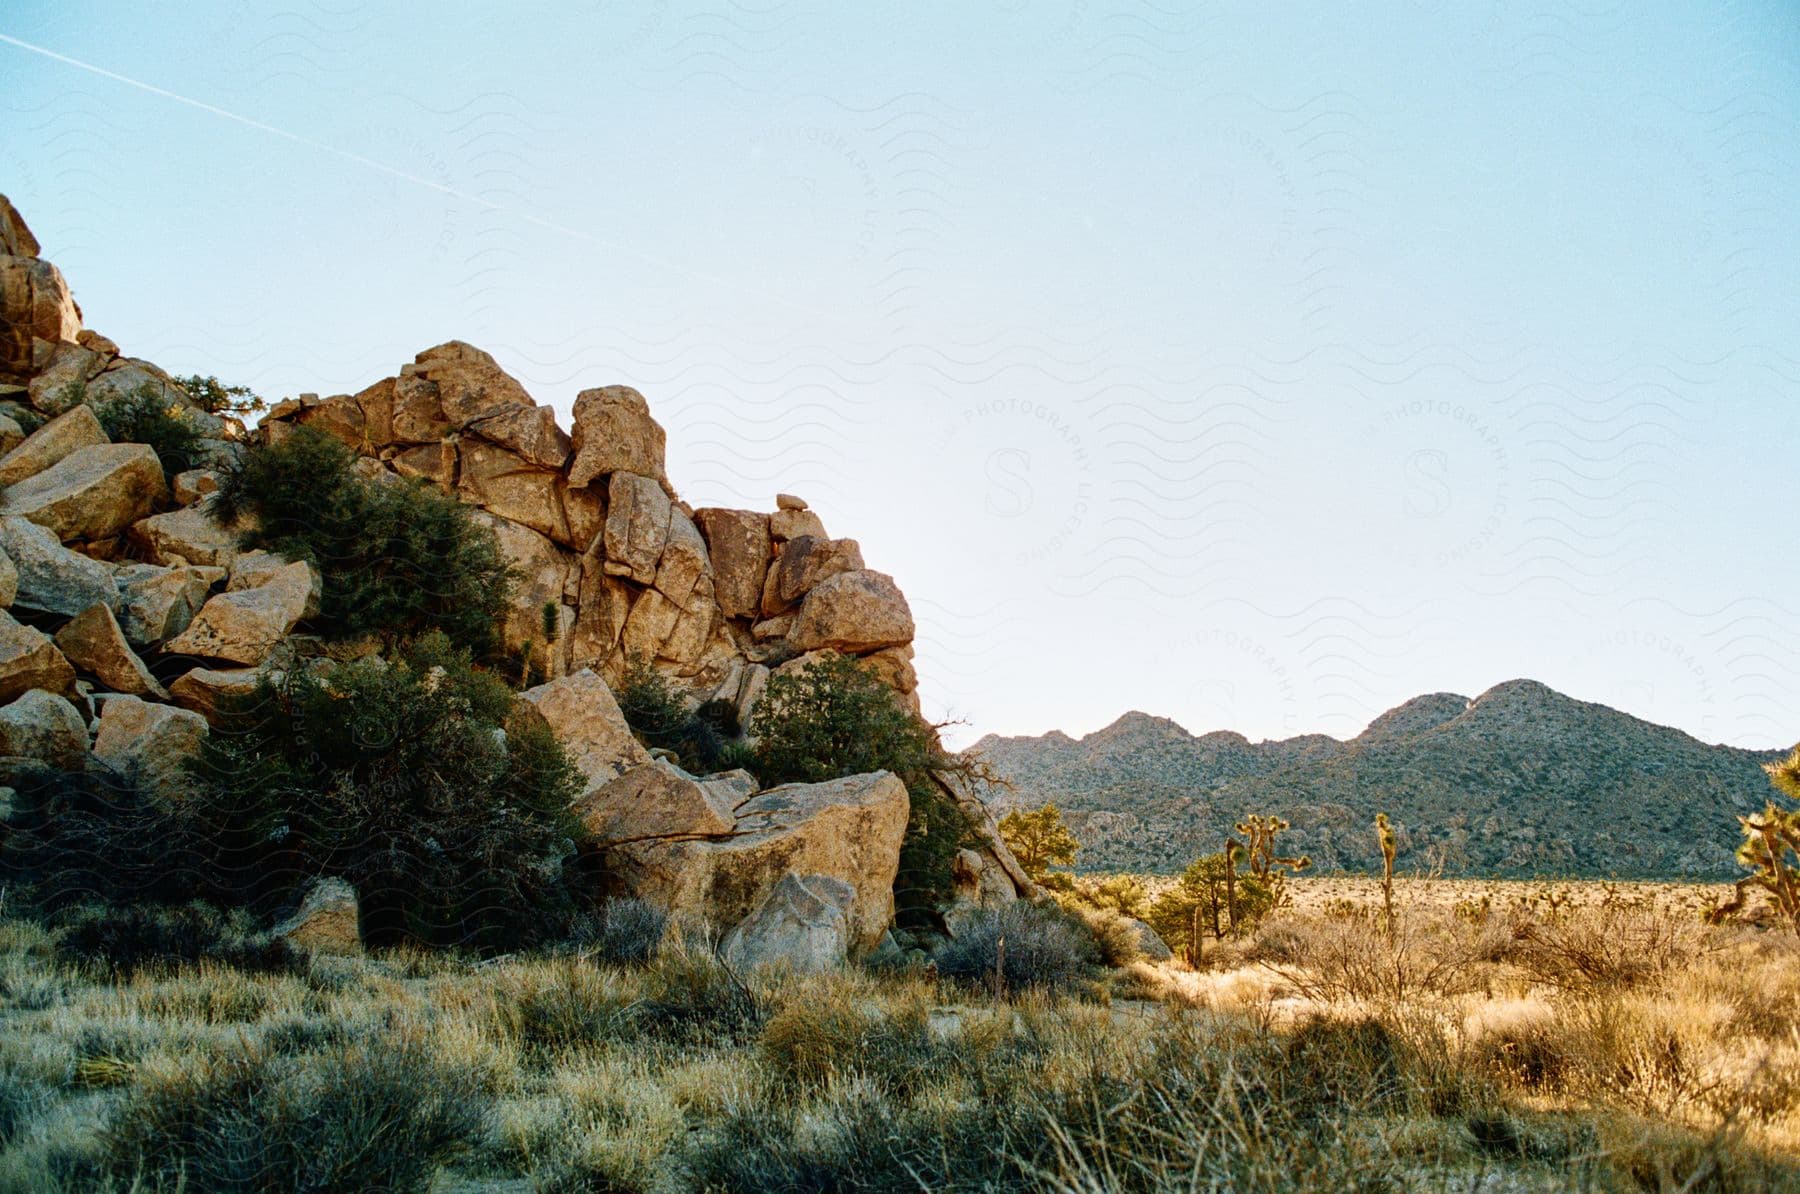 Rocky desert landscape with large boulders and scattered Joshua trees, under a clear sky.